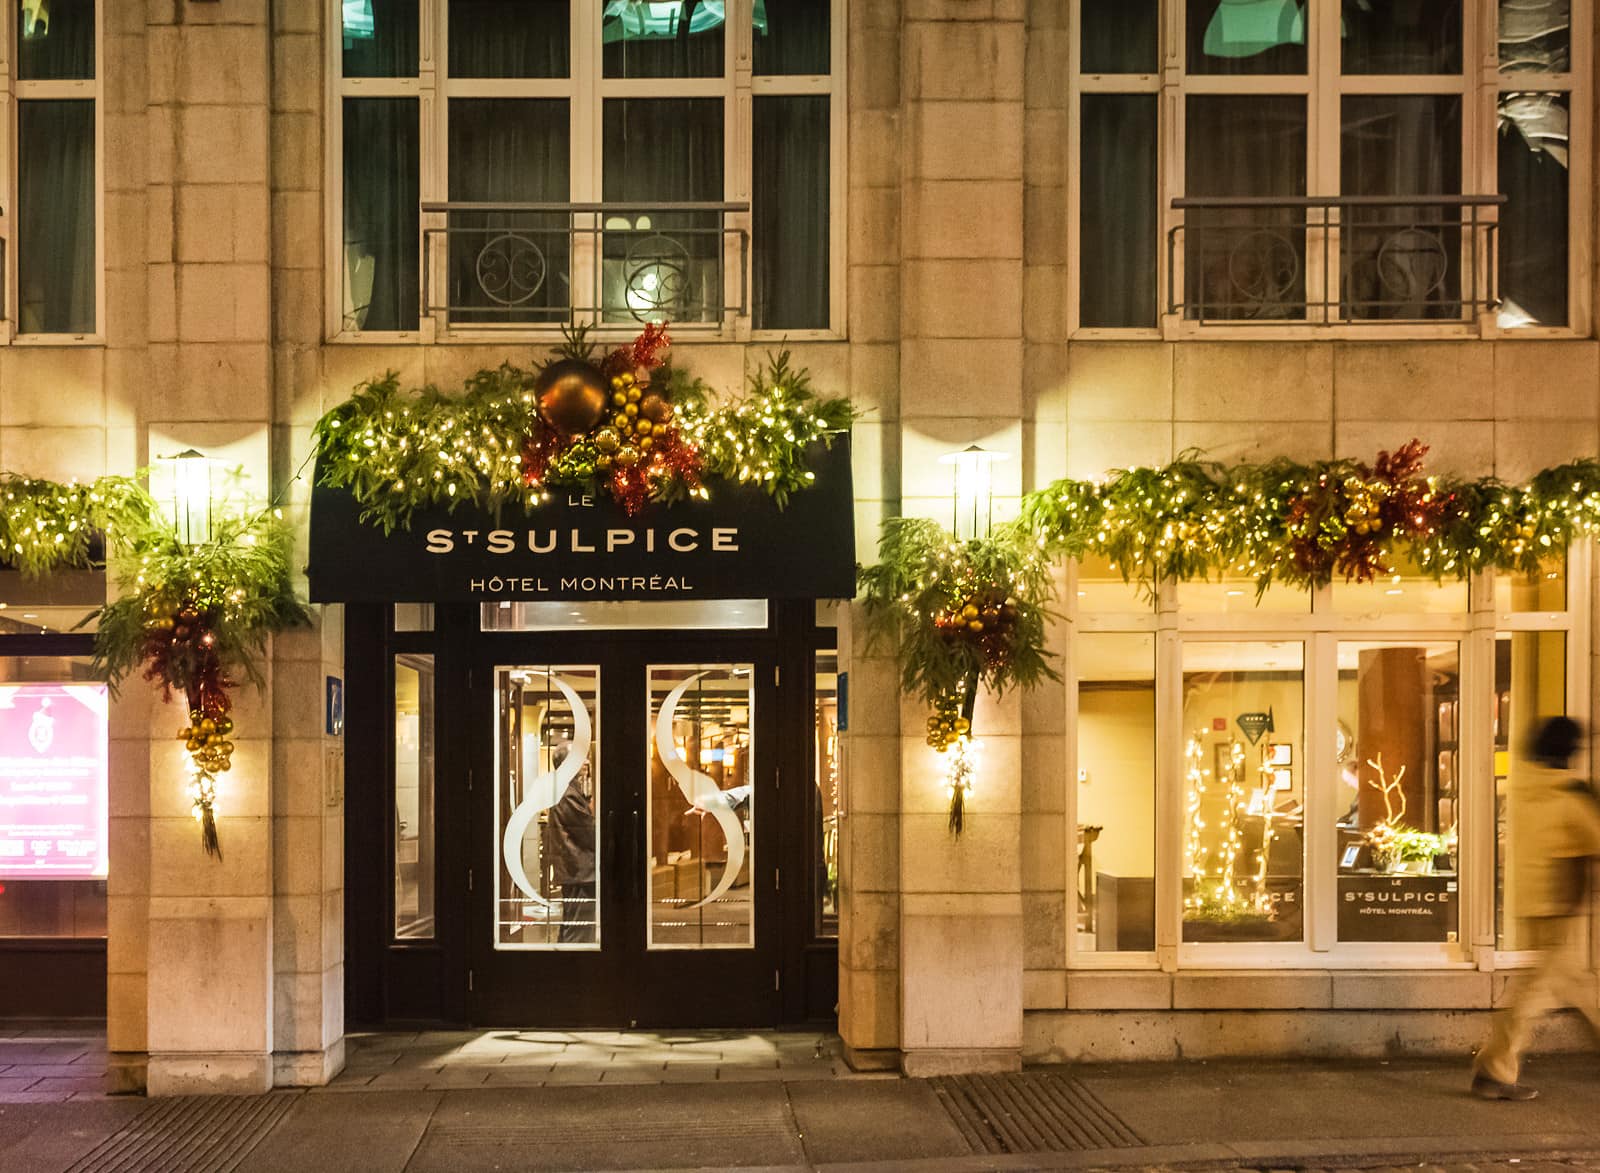 Le Saint Sulpice Hotel in Montreal